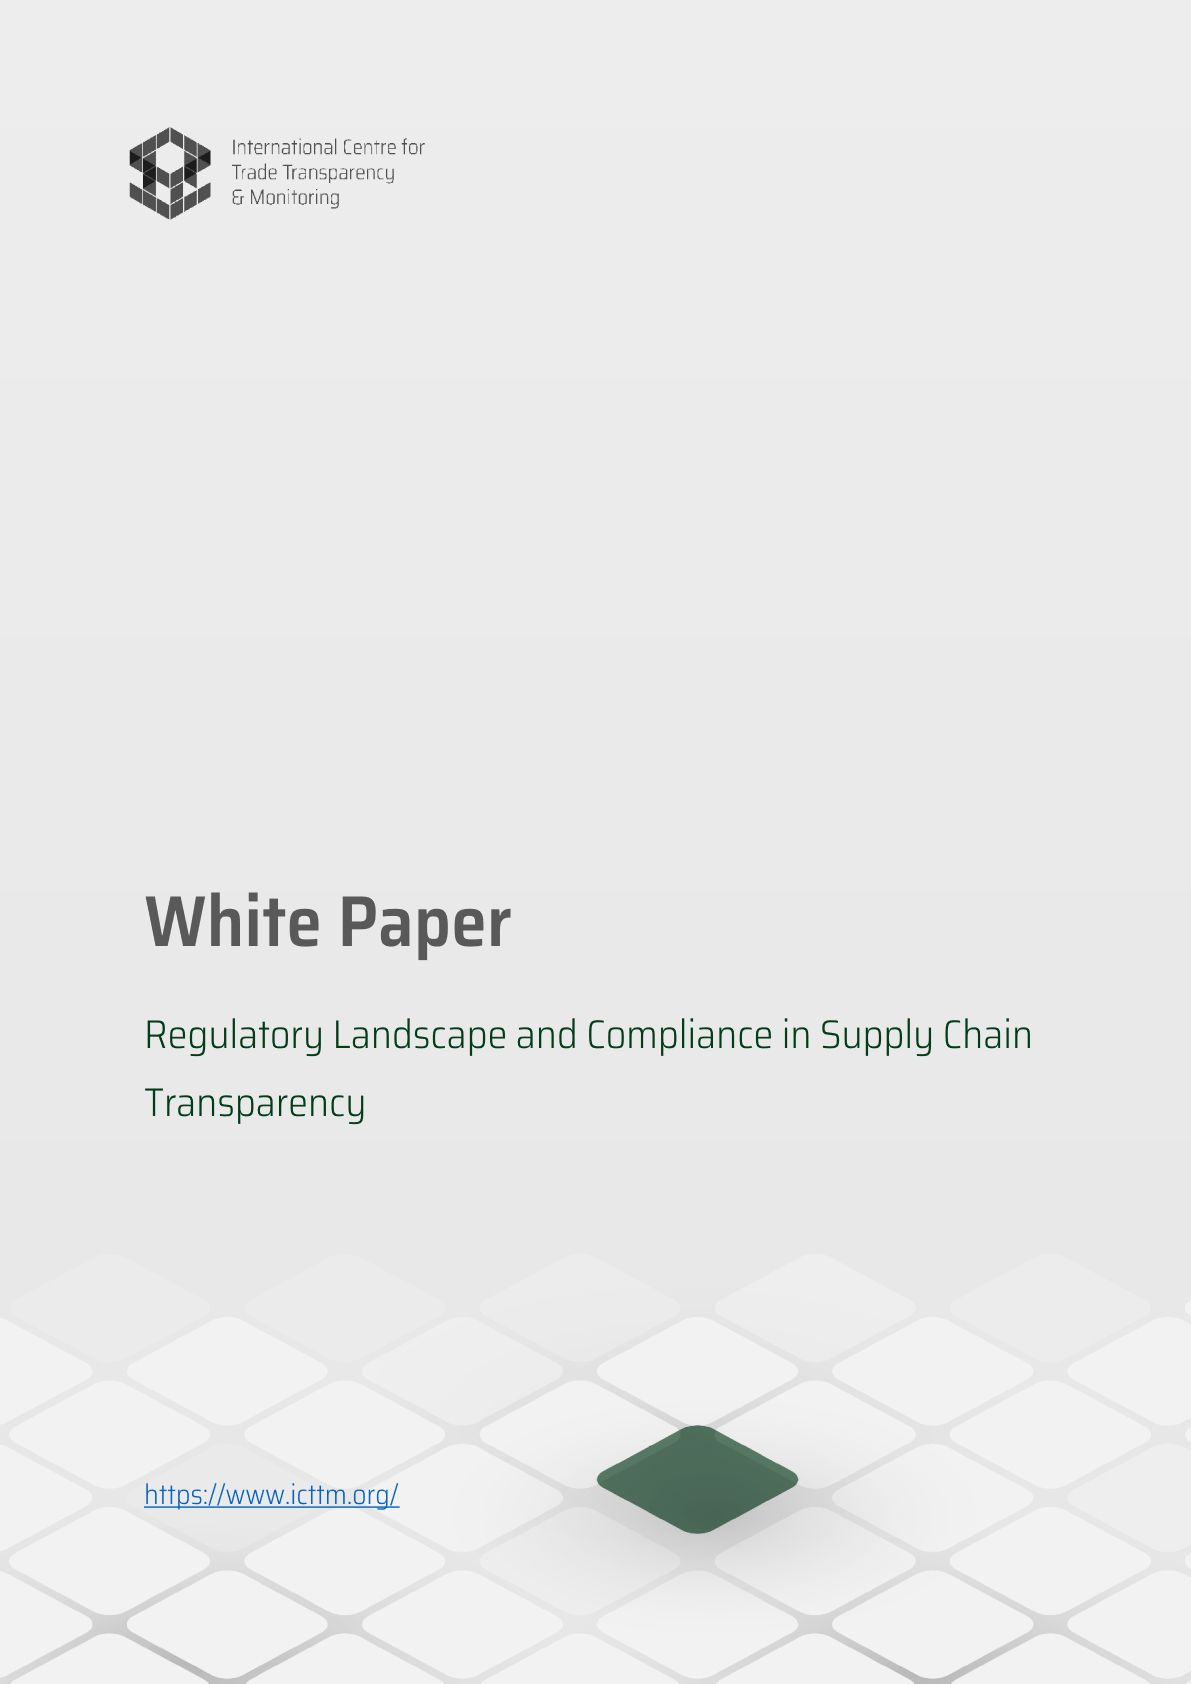 Regulatory Landscape and Compliance in Supply Chain Transparency